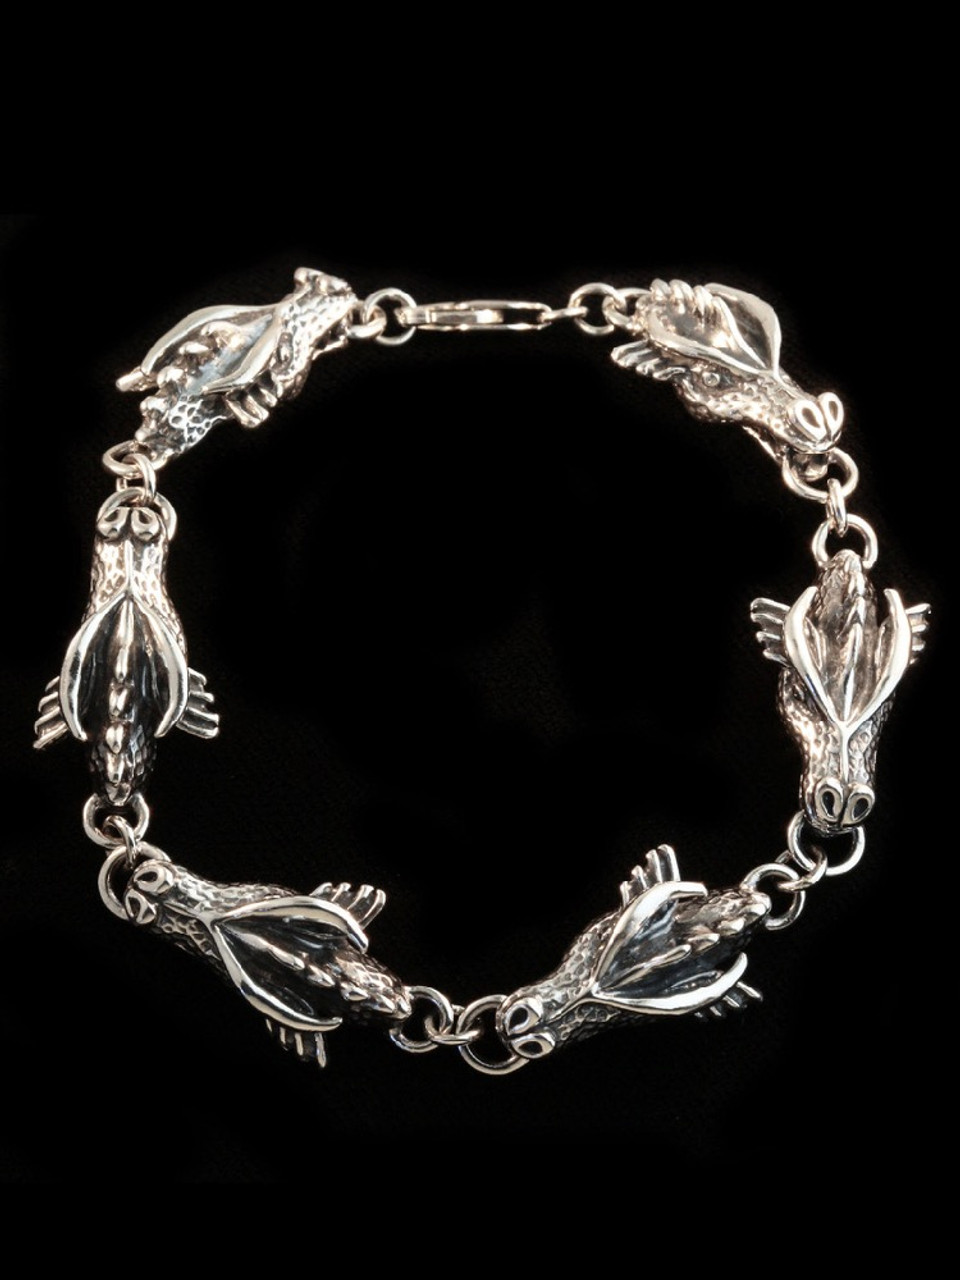 wd03 Old Chinese tibet silver handcarved double dragon head Bracelet | eBay